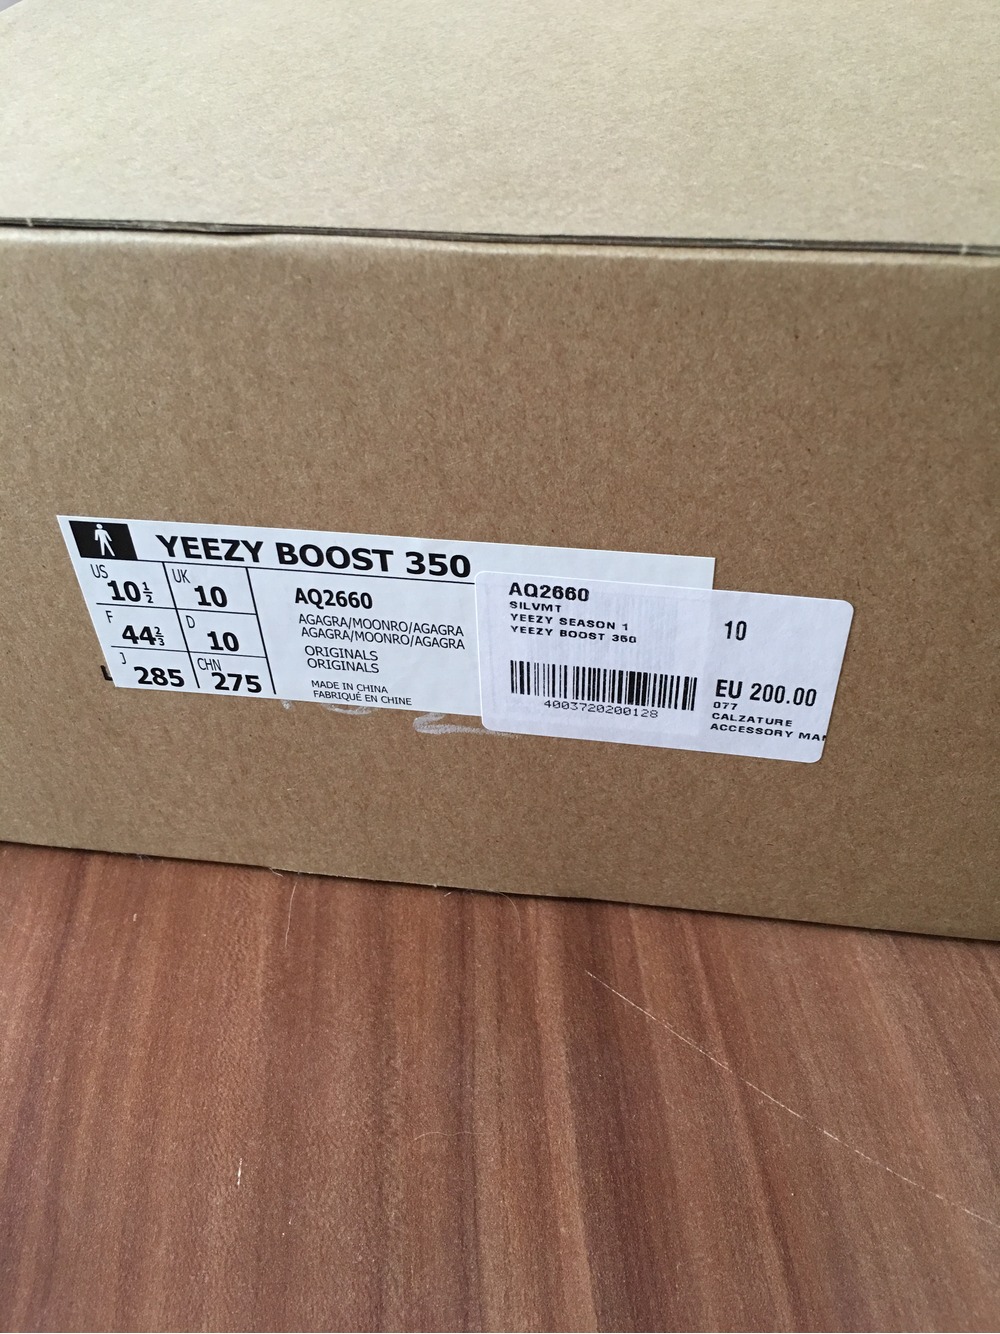 Adidas Yeezy 350 Boost Moonrock Review On Feet 